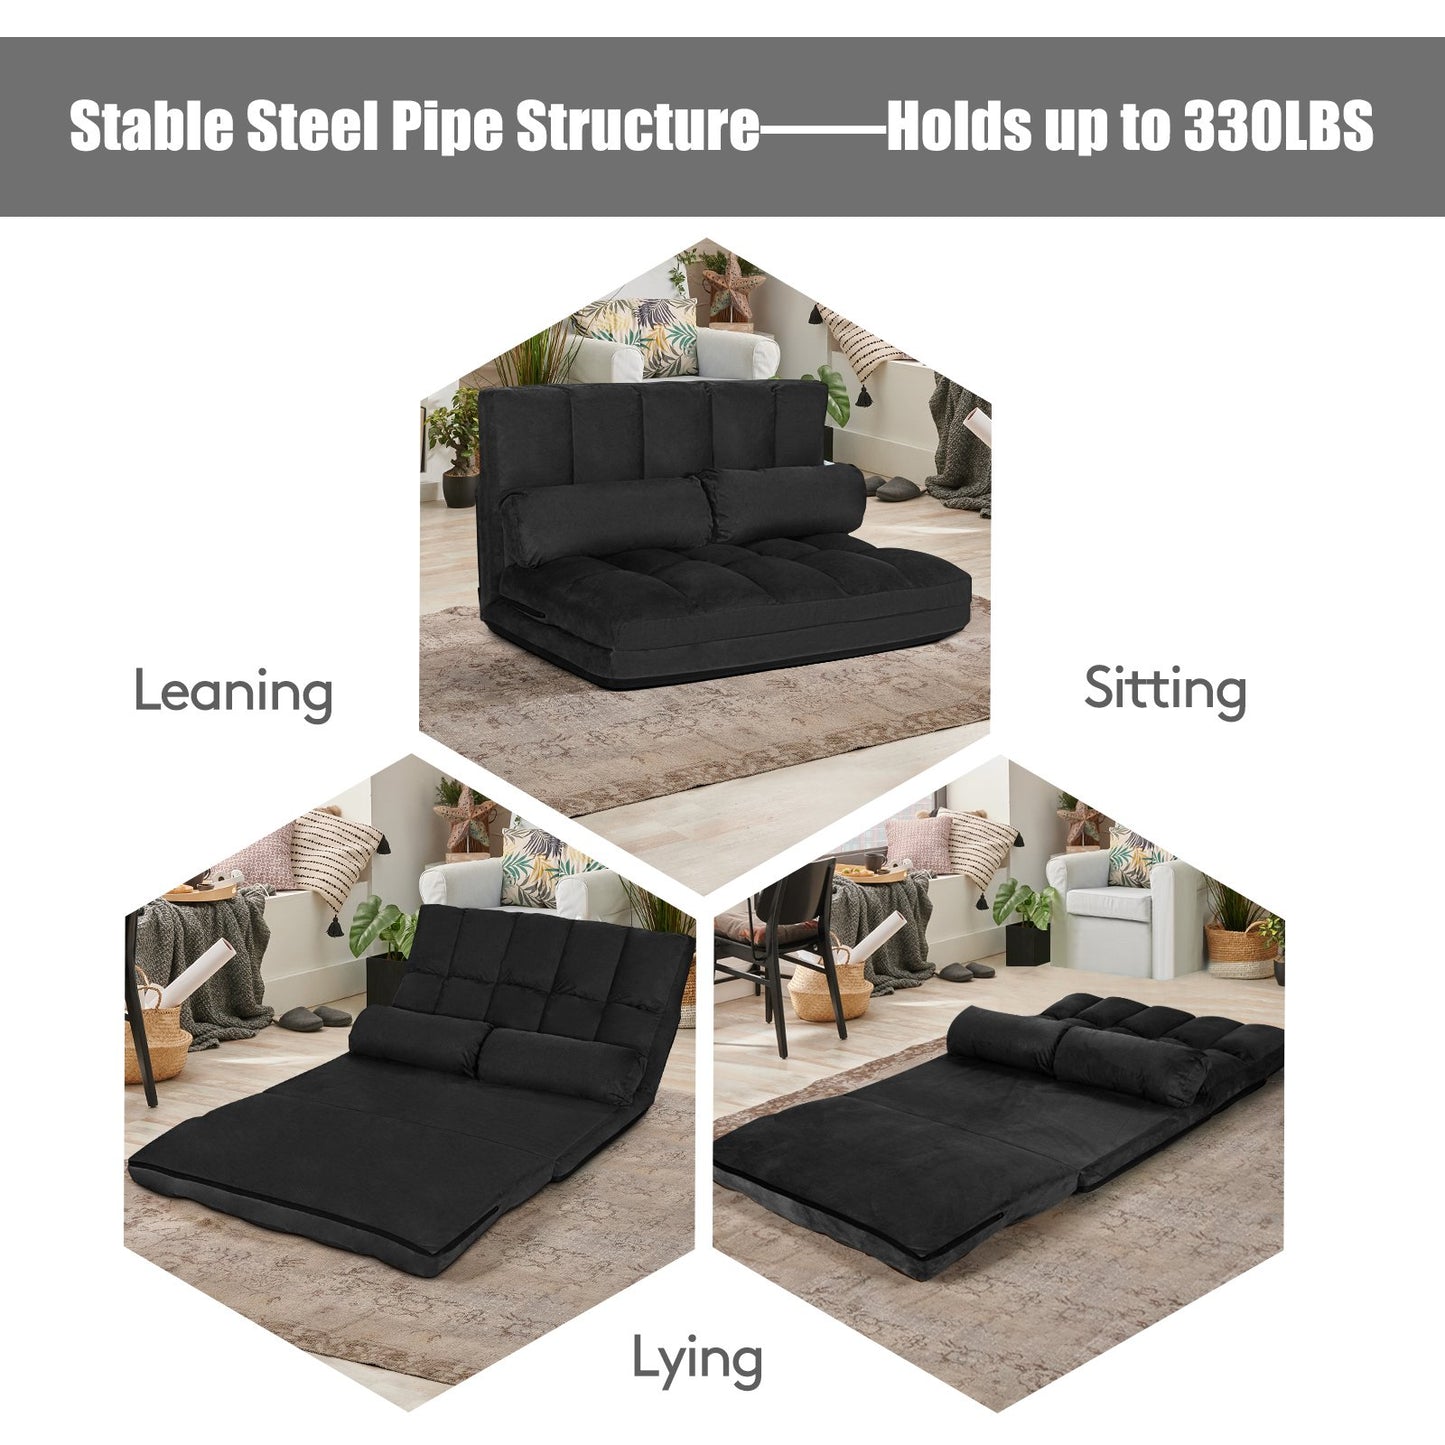 Foldable Floor 6-Position Adjustable Lounge Couch, Black - Gallery Canada